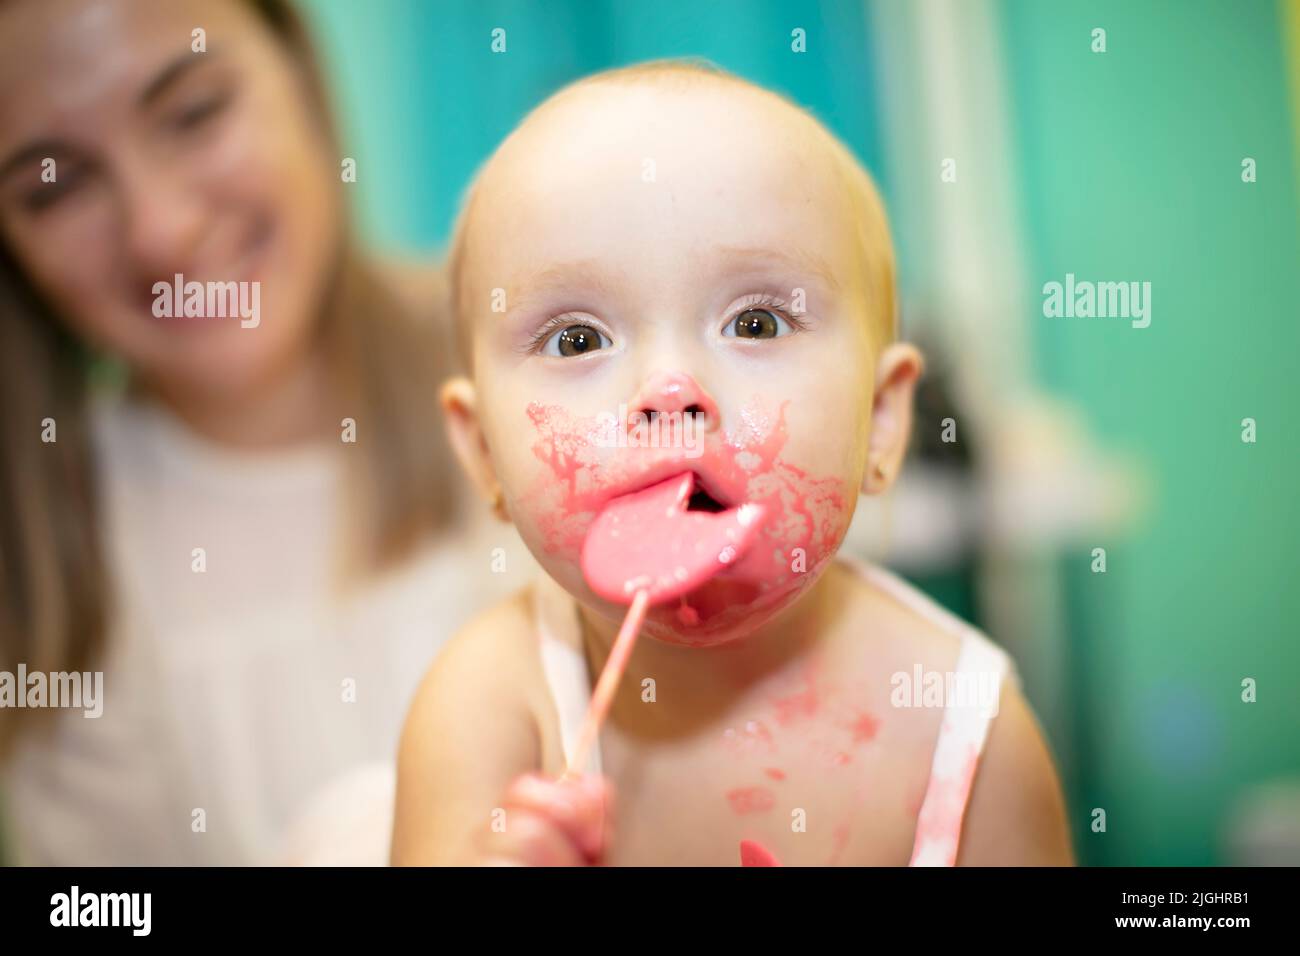 A little girl with a dirty face eats a candy and looks at the camera. Stock Photo